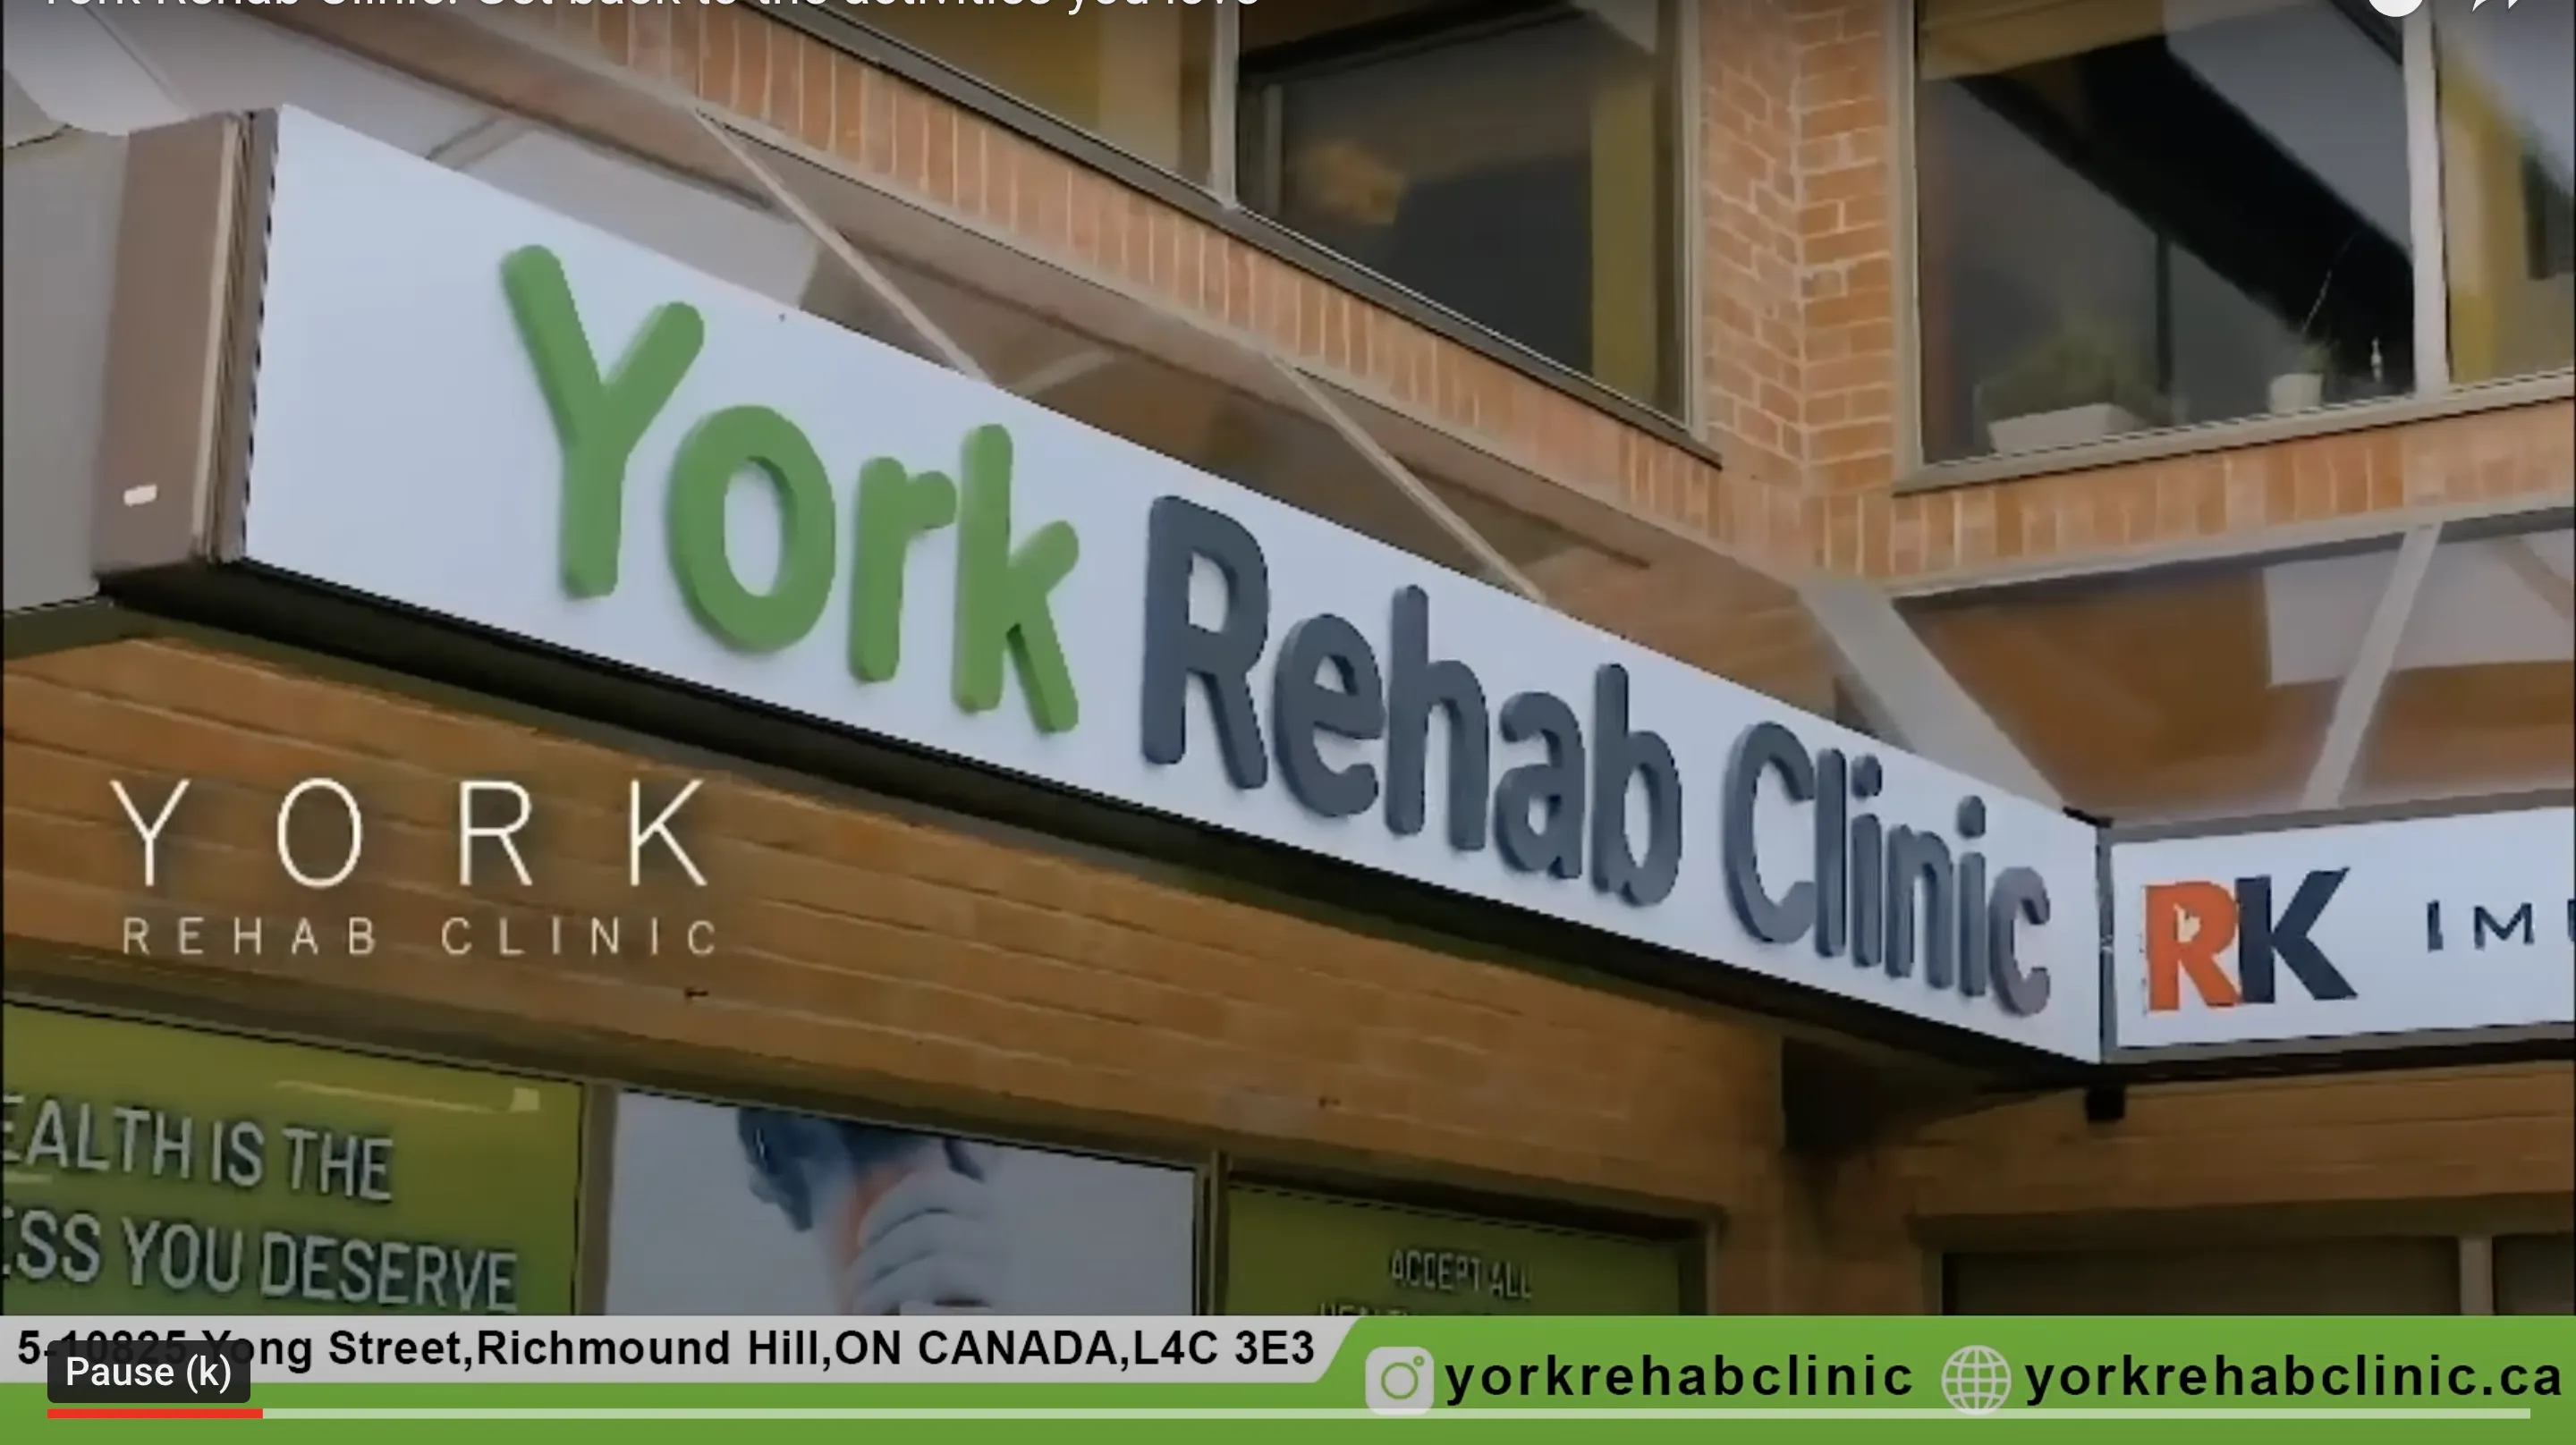 York Rehab Clinic: Get back to the activities you love